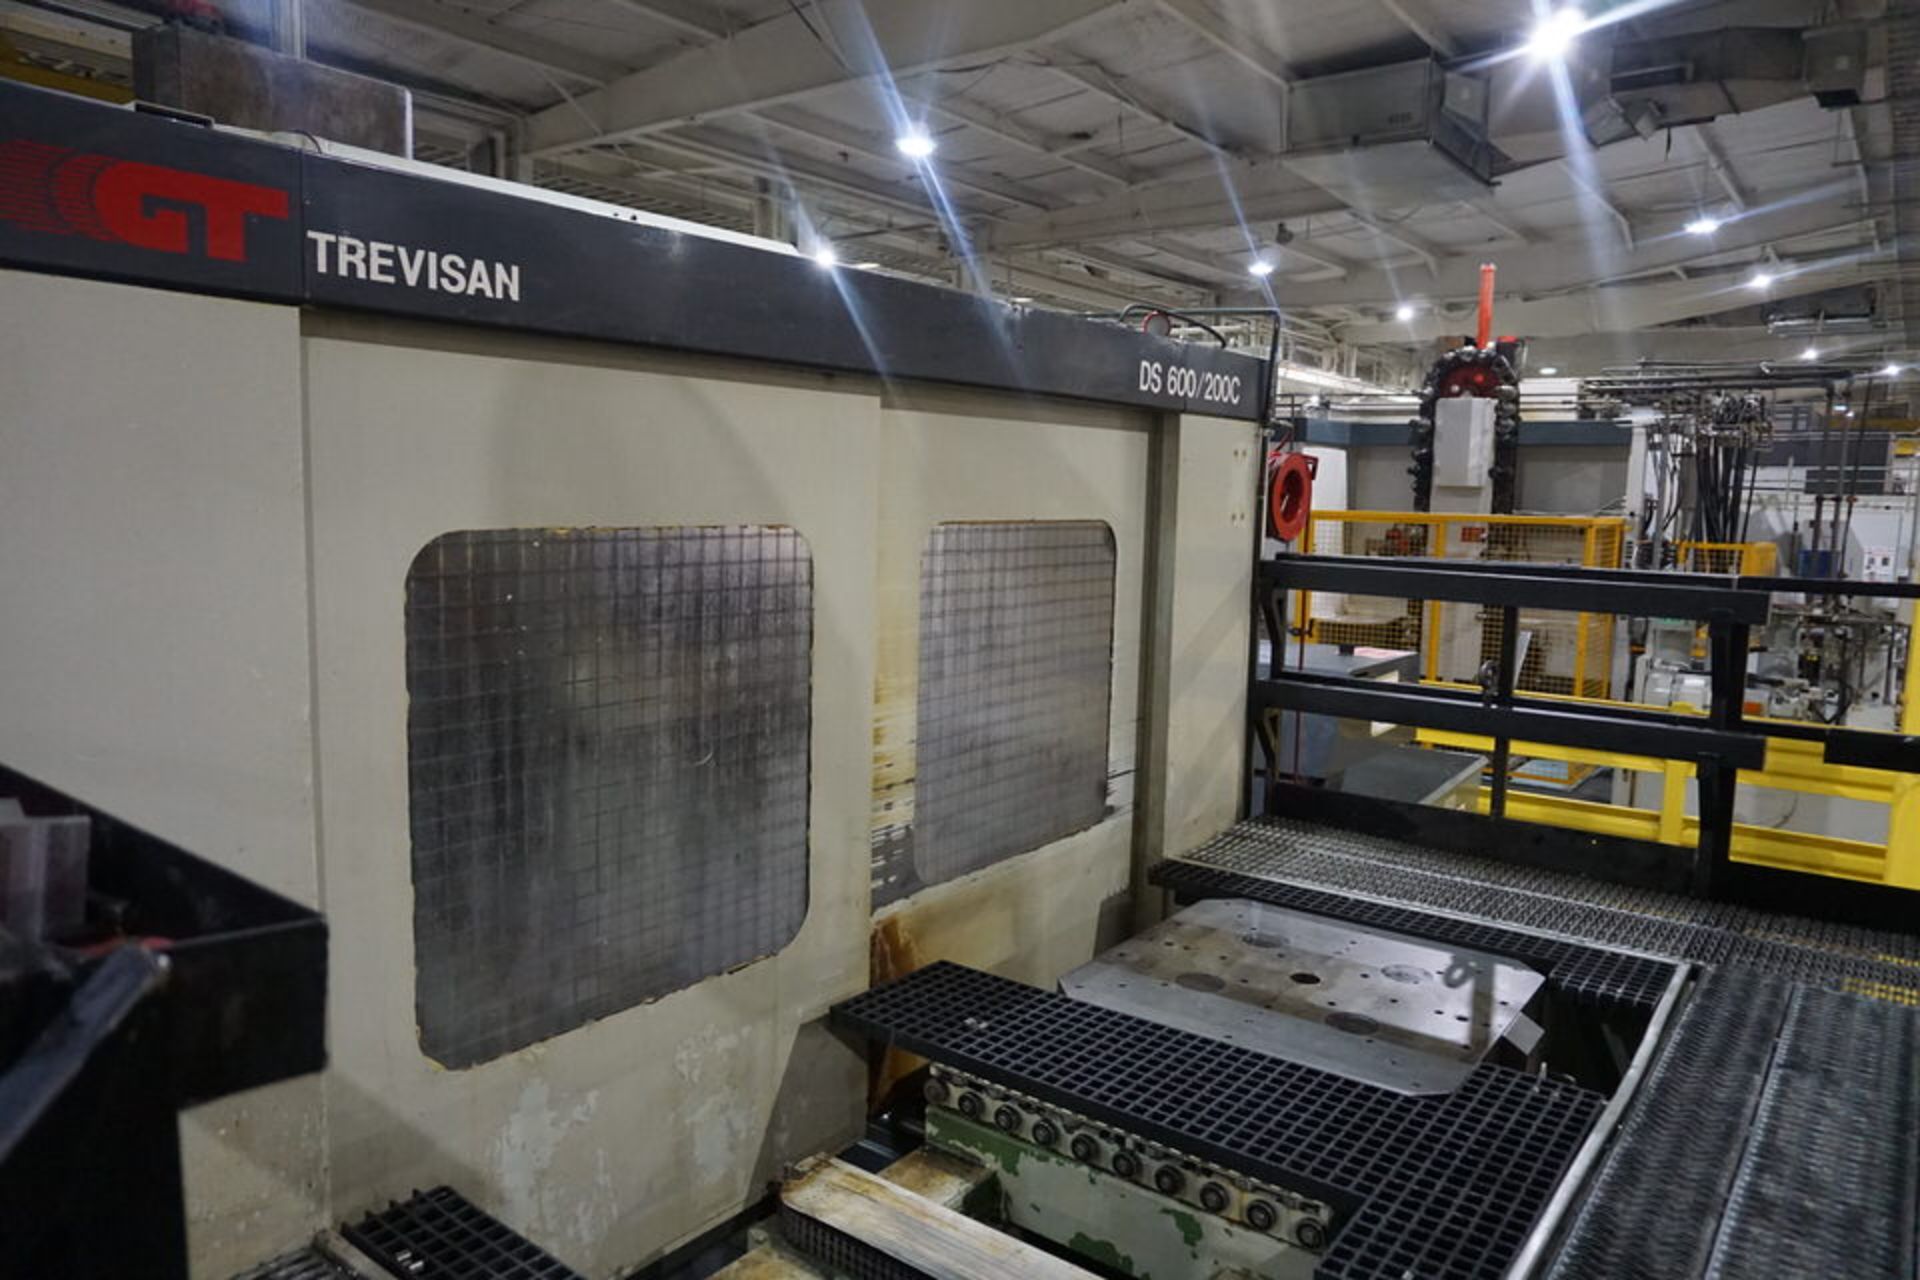 2001 TREVISAN DS600/2000 5 AXIS HORIZONTAL MACHINING CENTER - Image 4 of 10